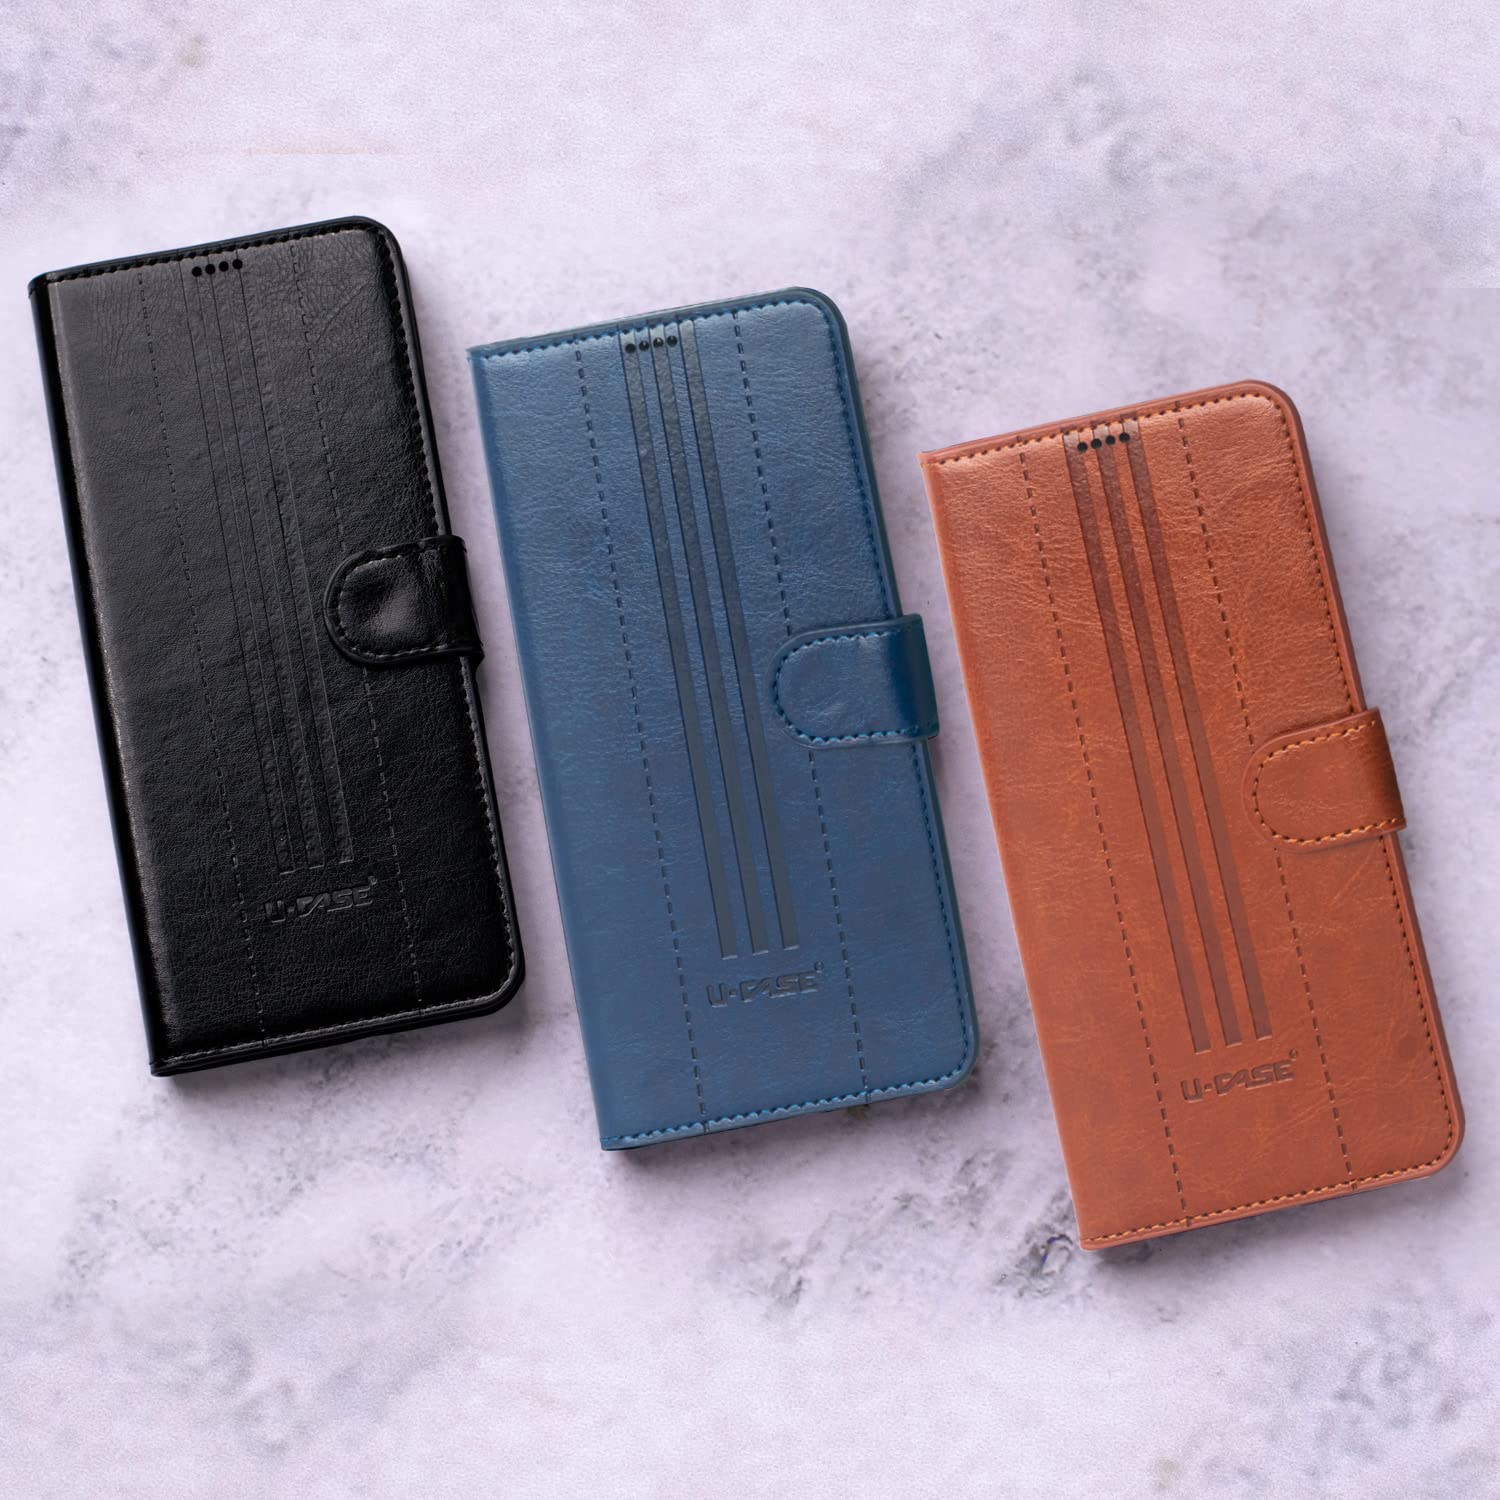 U-CASE Flip Cover for OnePlus Nord CE Vegan Foldable Stand & Pocket Magnetic Closure colors